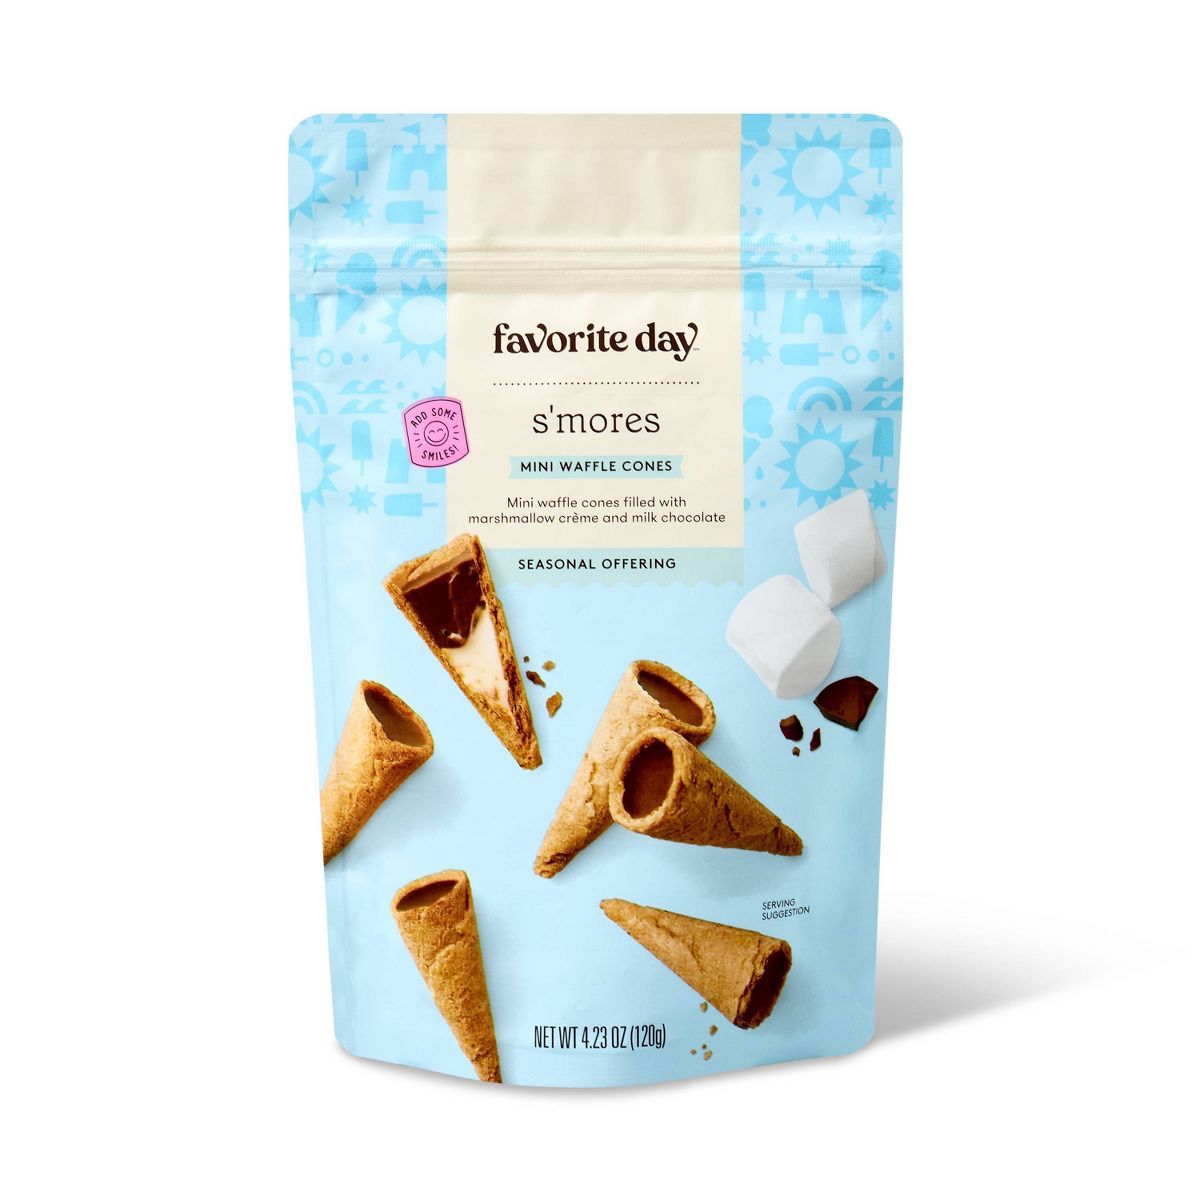 S'mores with Waffle Cones - 4.23oz - Favorite Day™ | Target